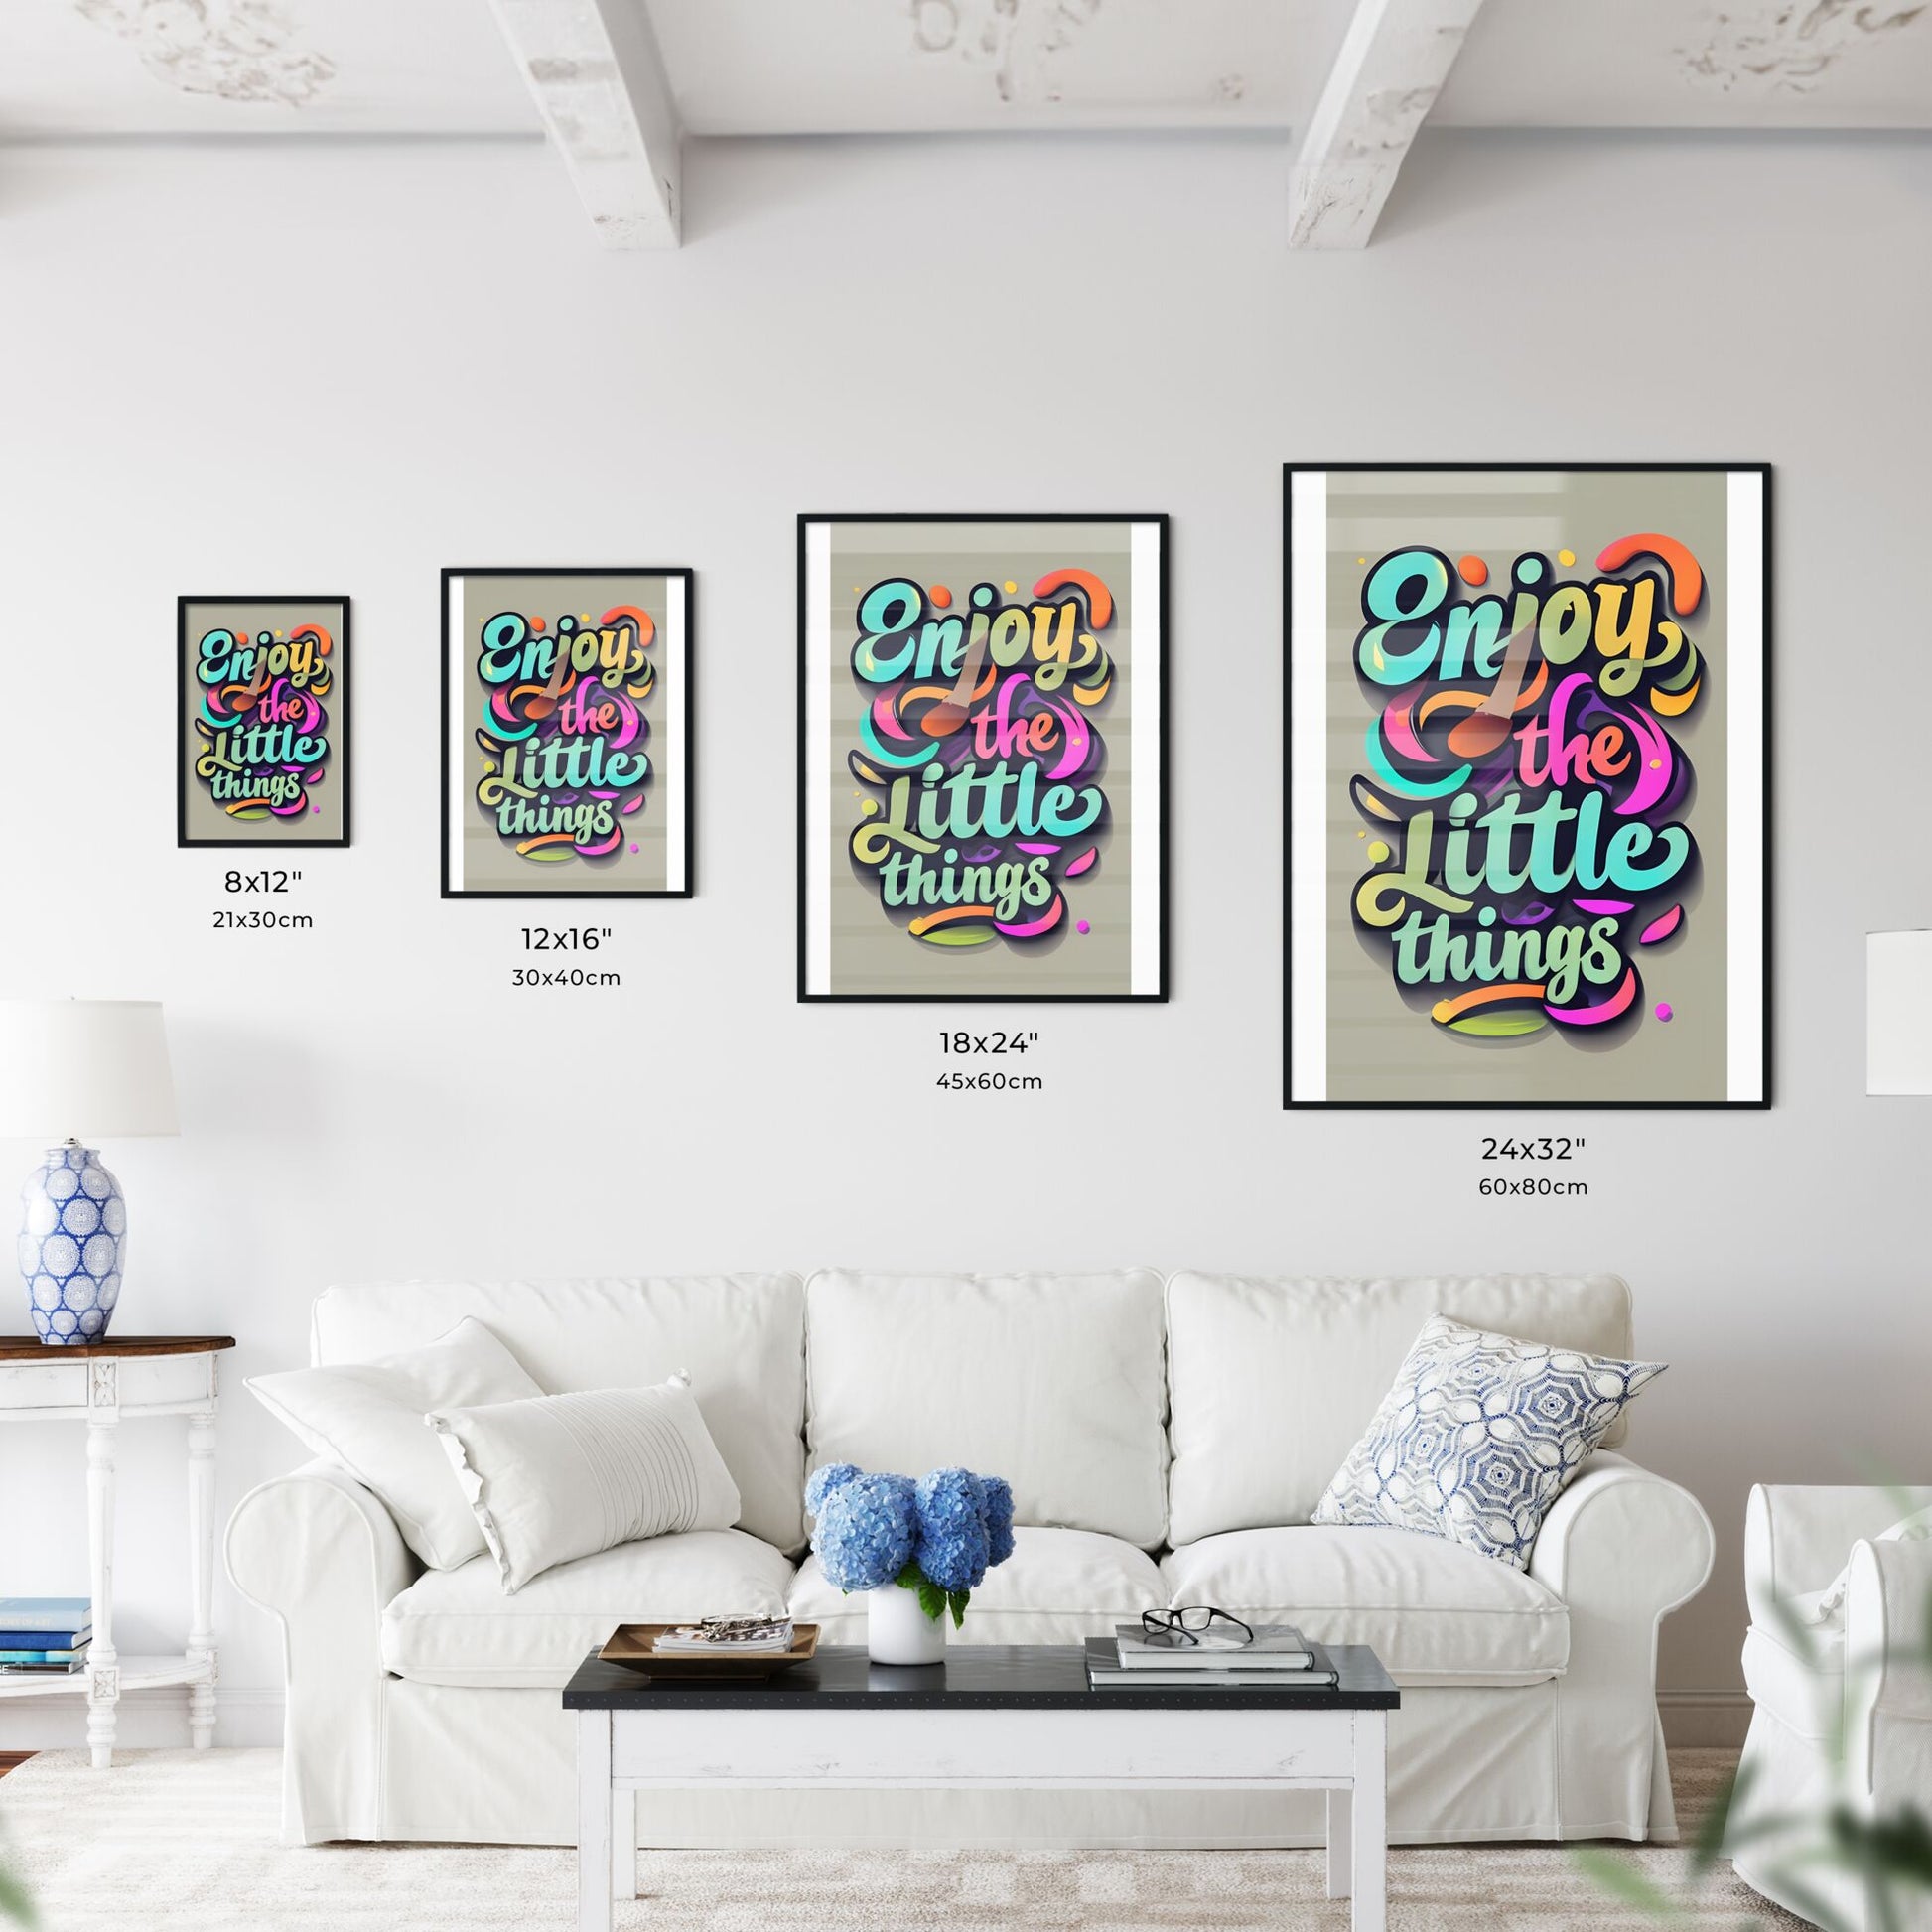 Enjoy The Little Things - A Colorful Text With A Brush Art Print Default Title